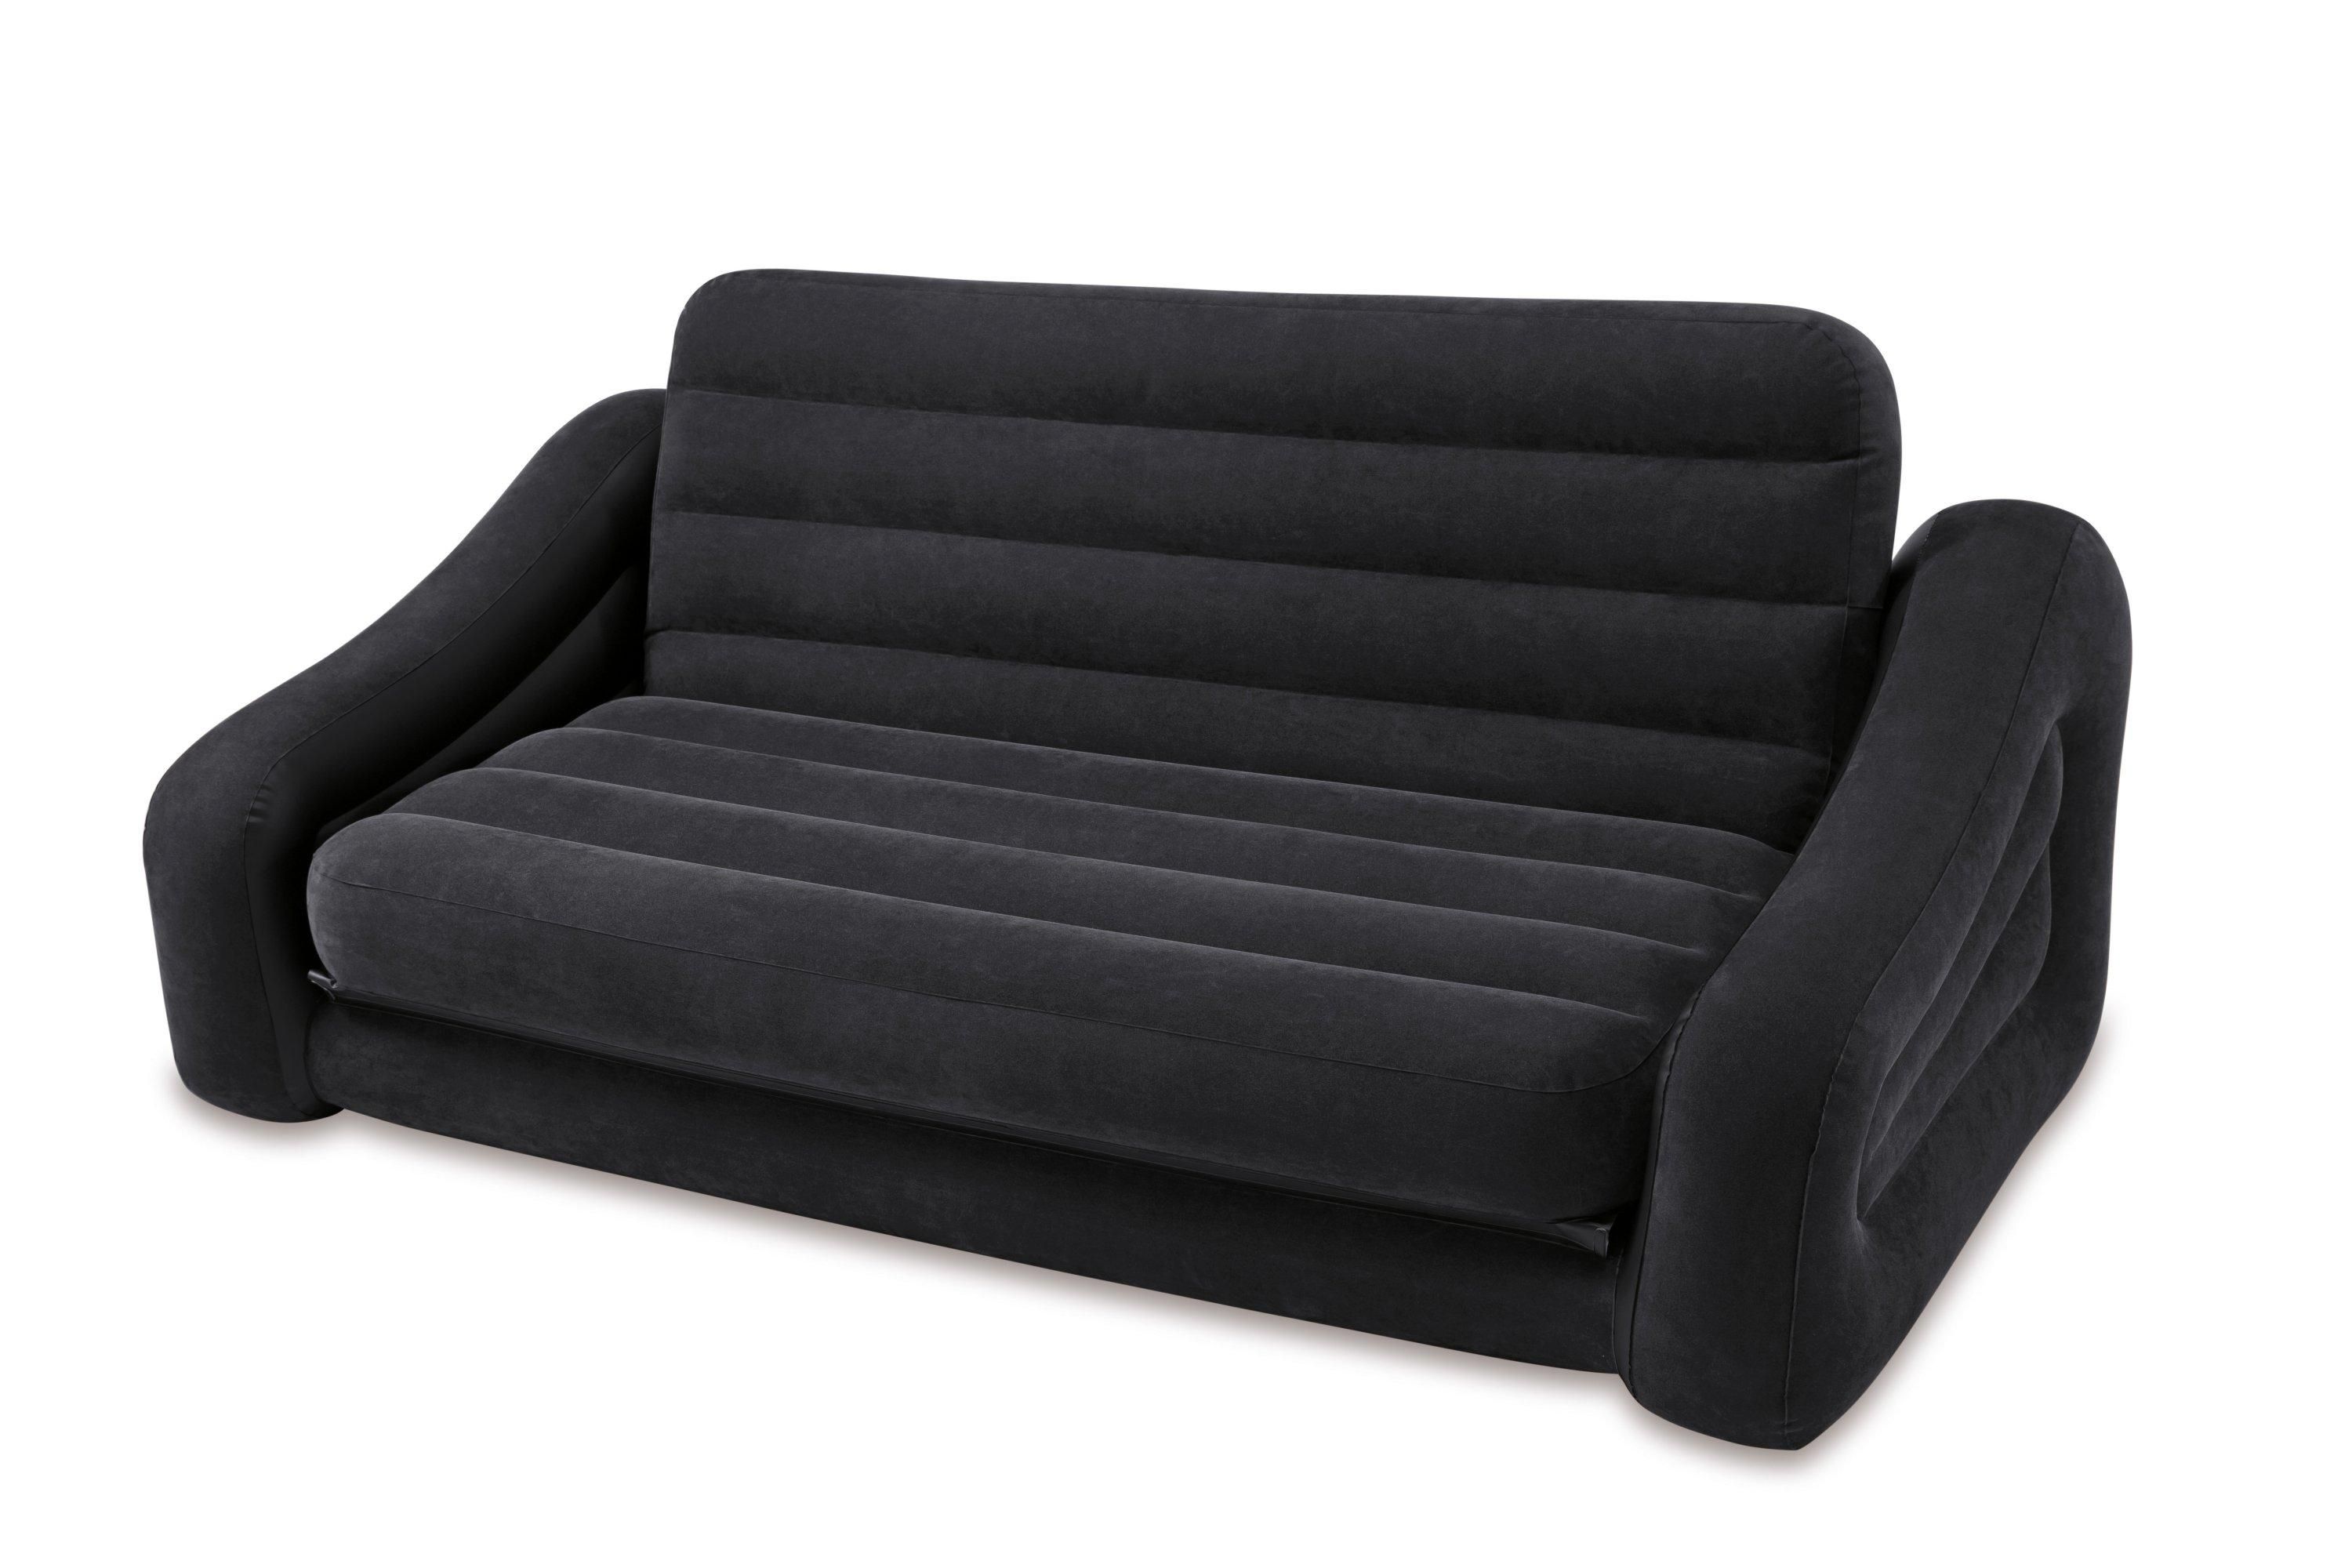 Intex Inflatable Pull Out Sofa Queen Bed Sleeper 68566Ep + 66619E For Intex Air Sofa Beds (View 10 of 20)